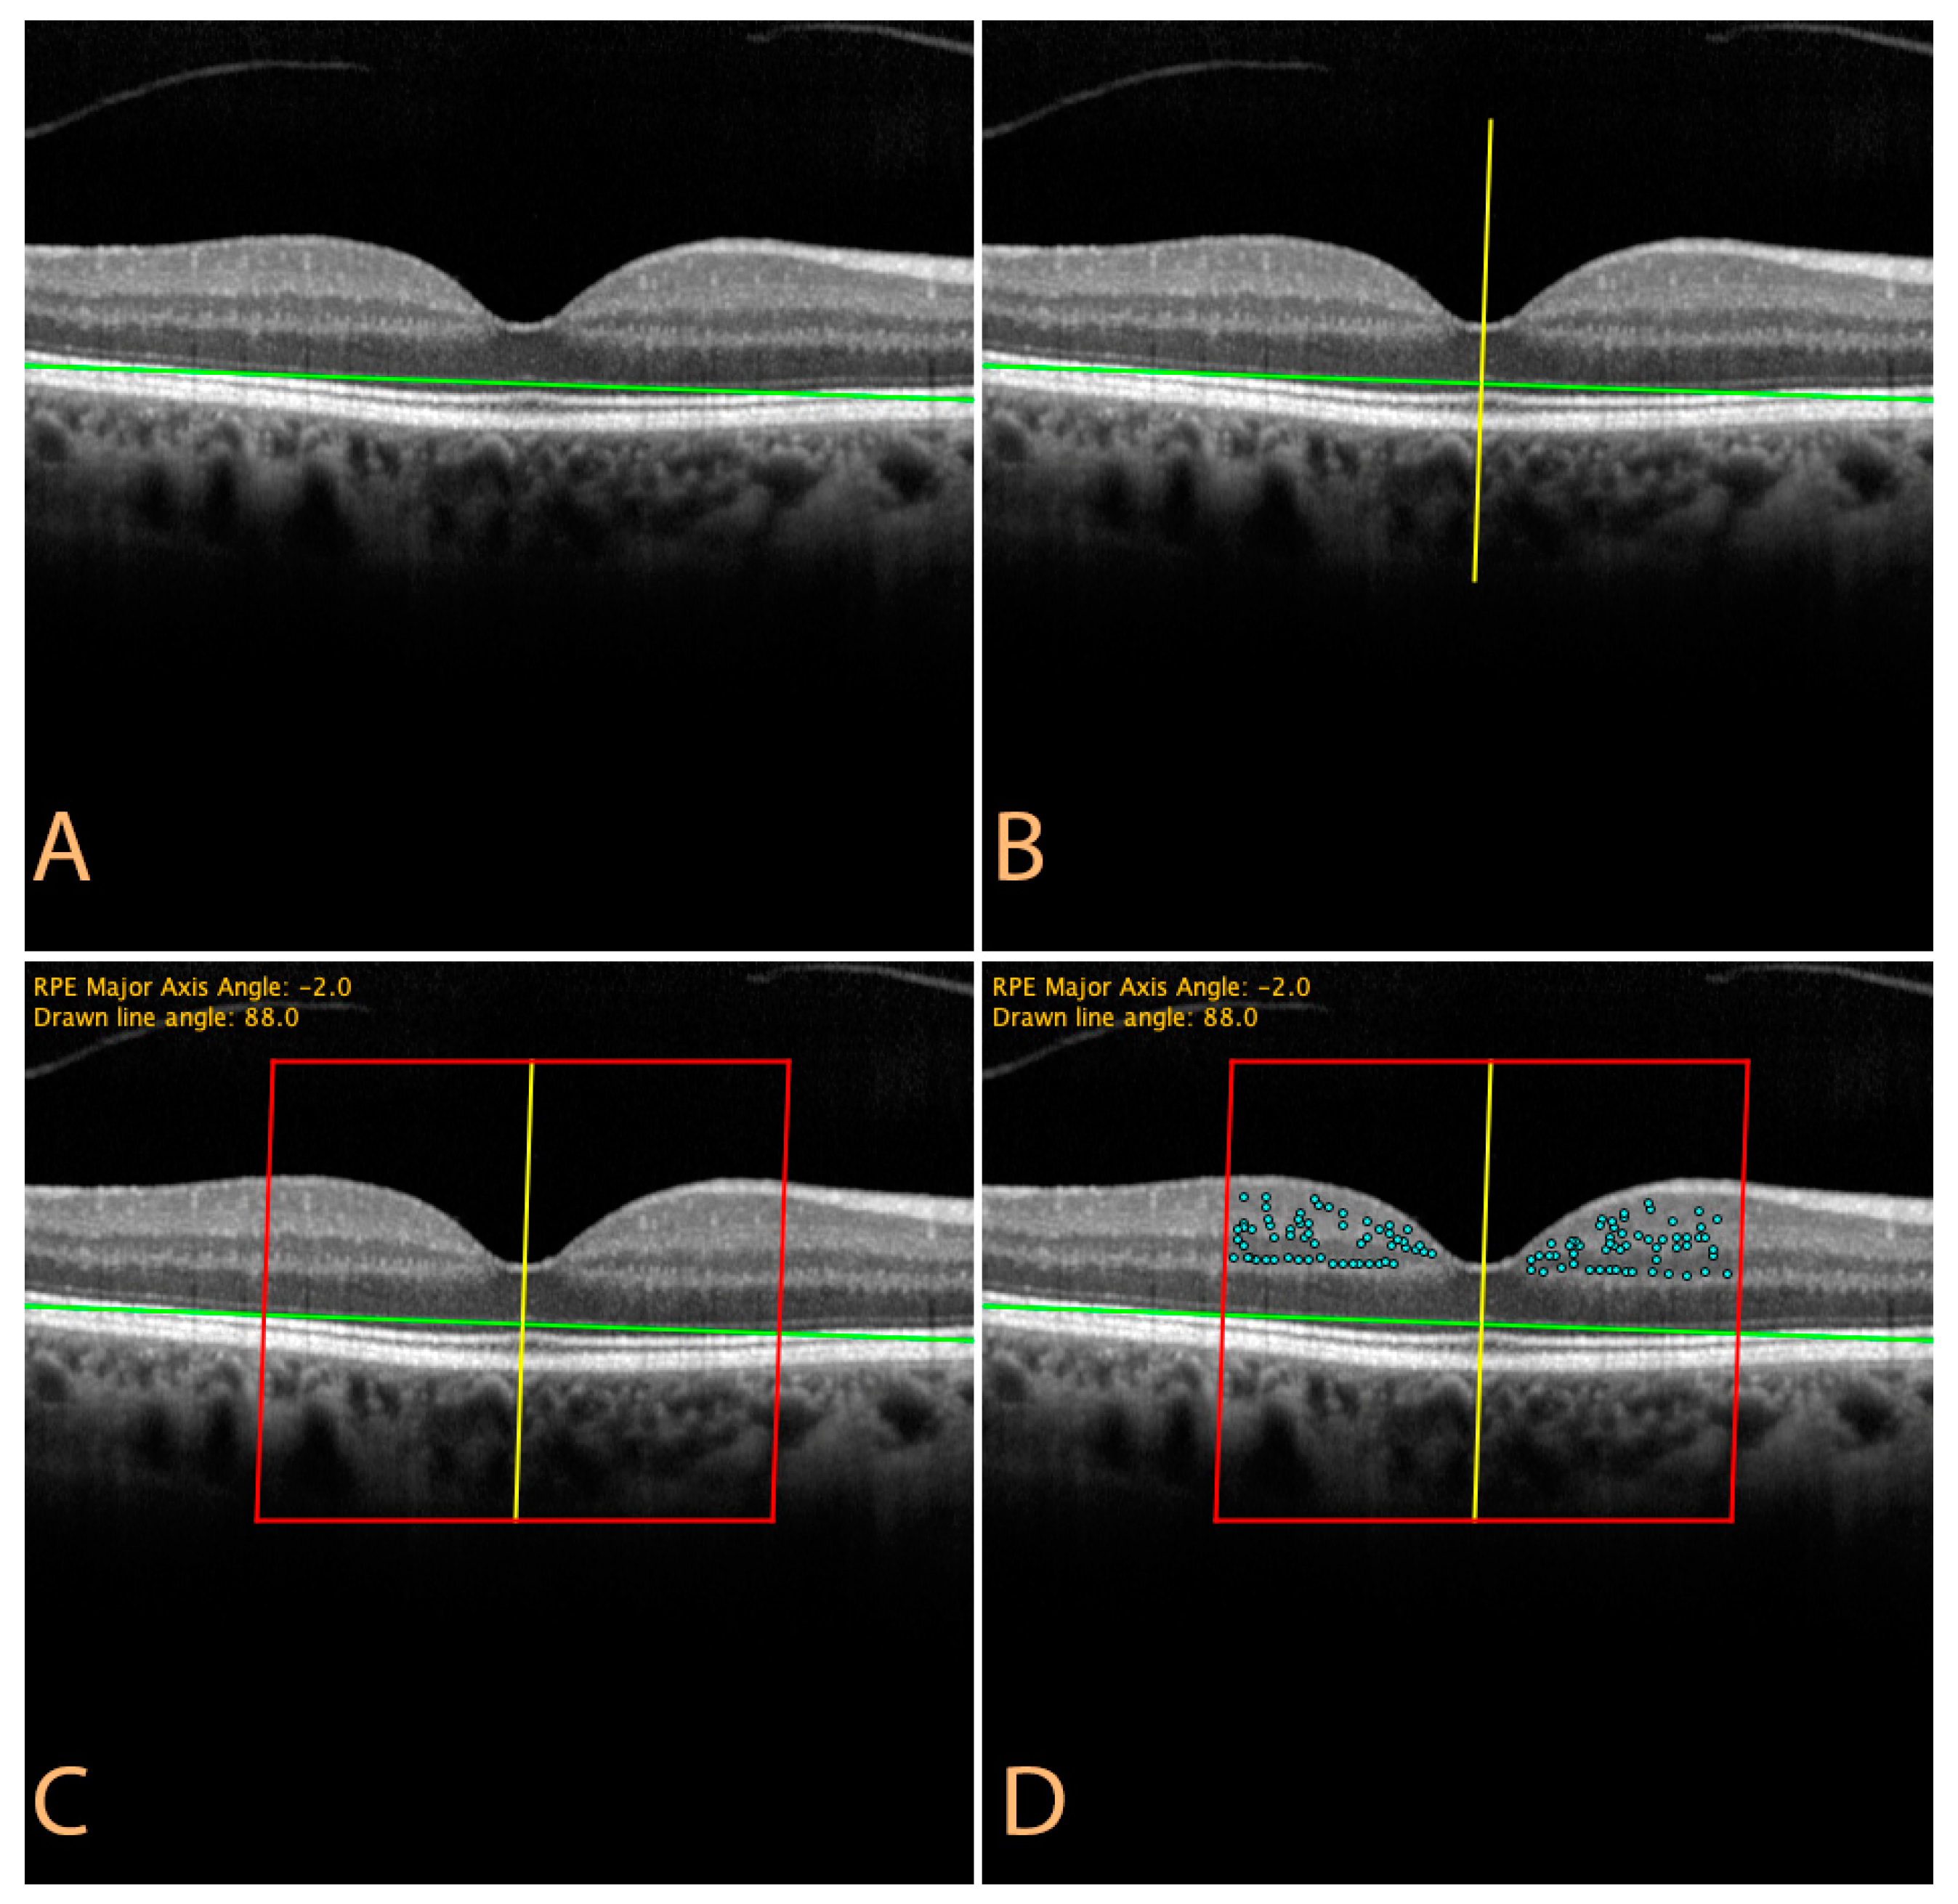 JCM | Free Full-Text | A Comparison of Hyper-Reflective Retinal Spot Counts  in Optical Coherence Tomography Images from Glaucomatous and Healthy Eyes